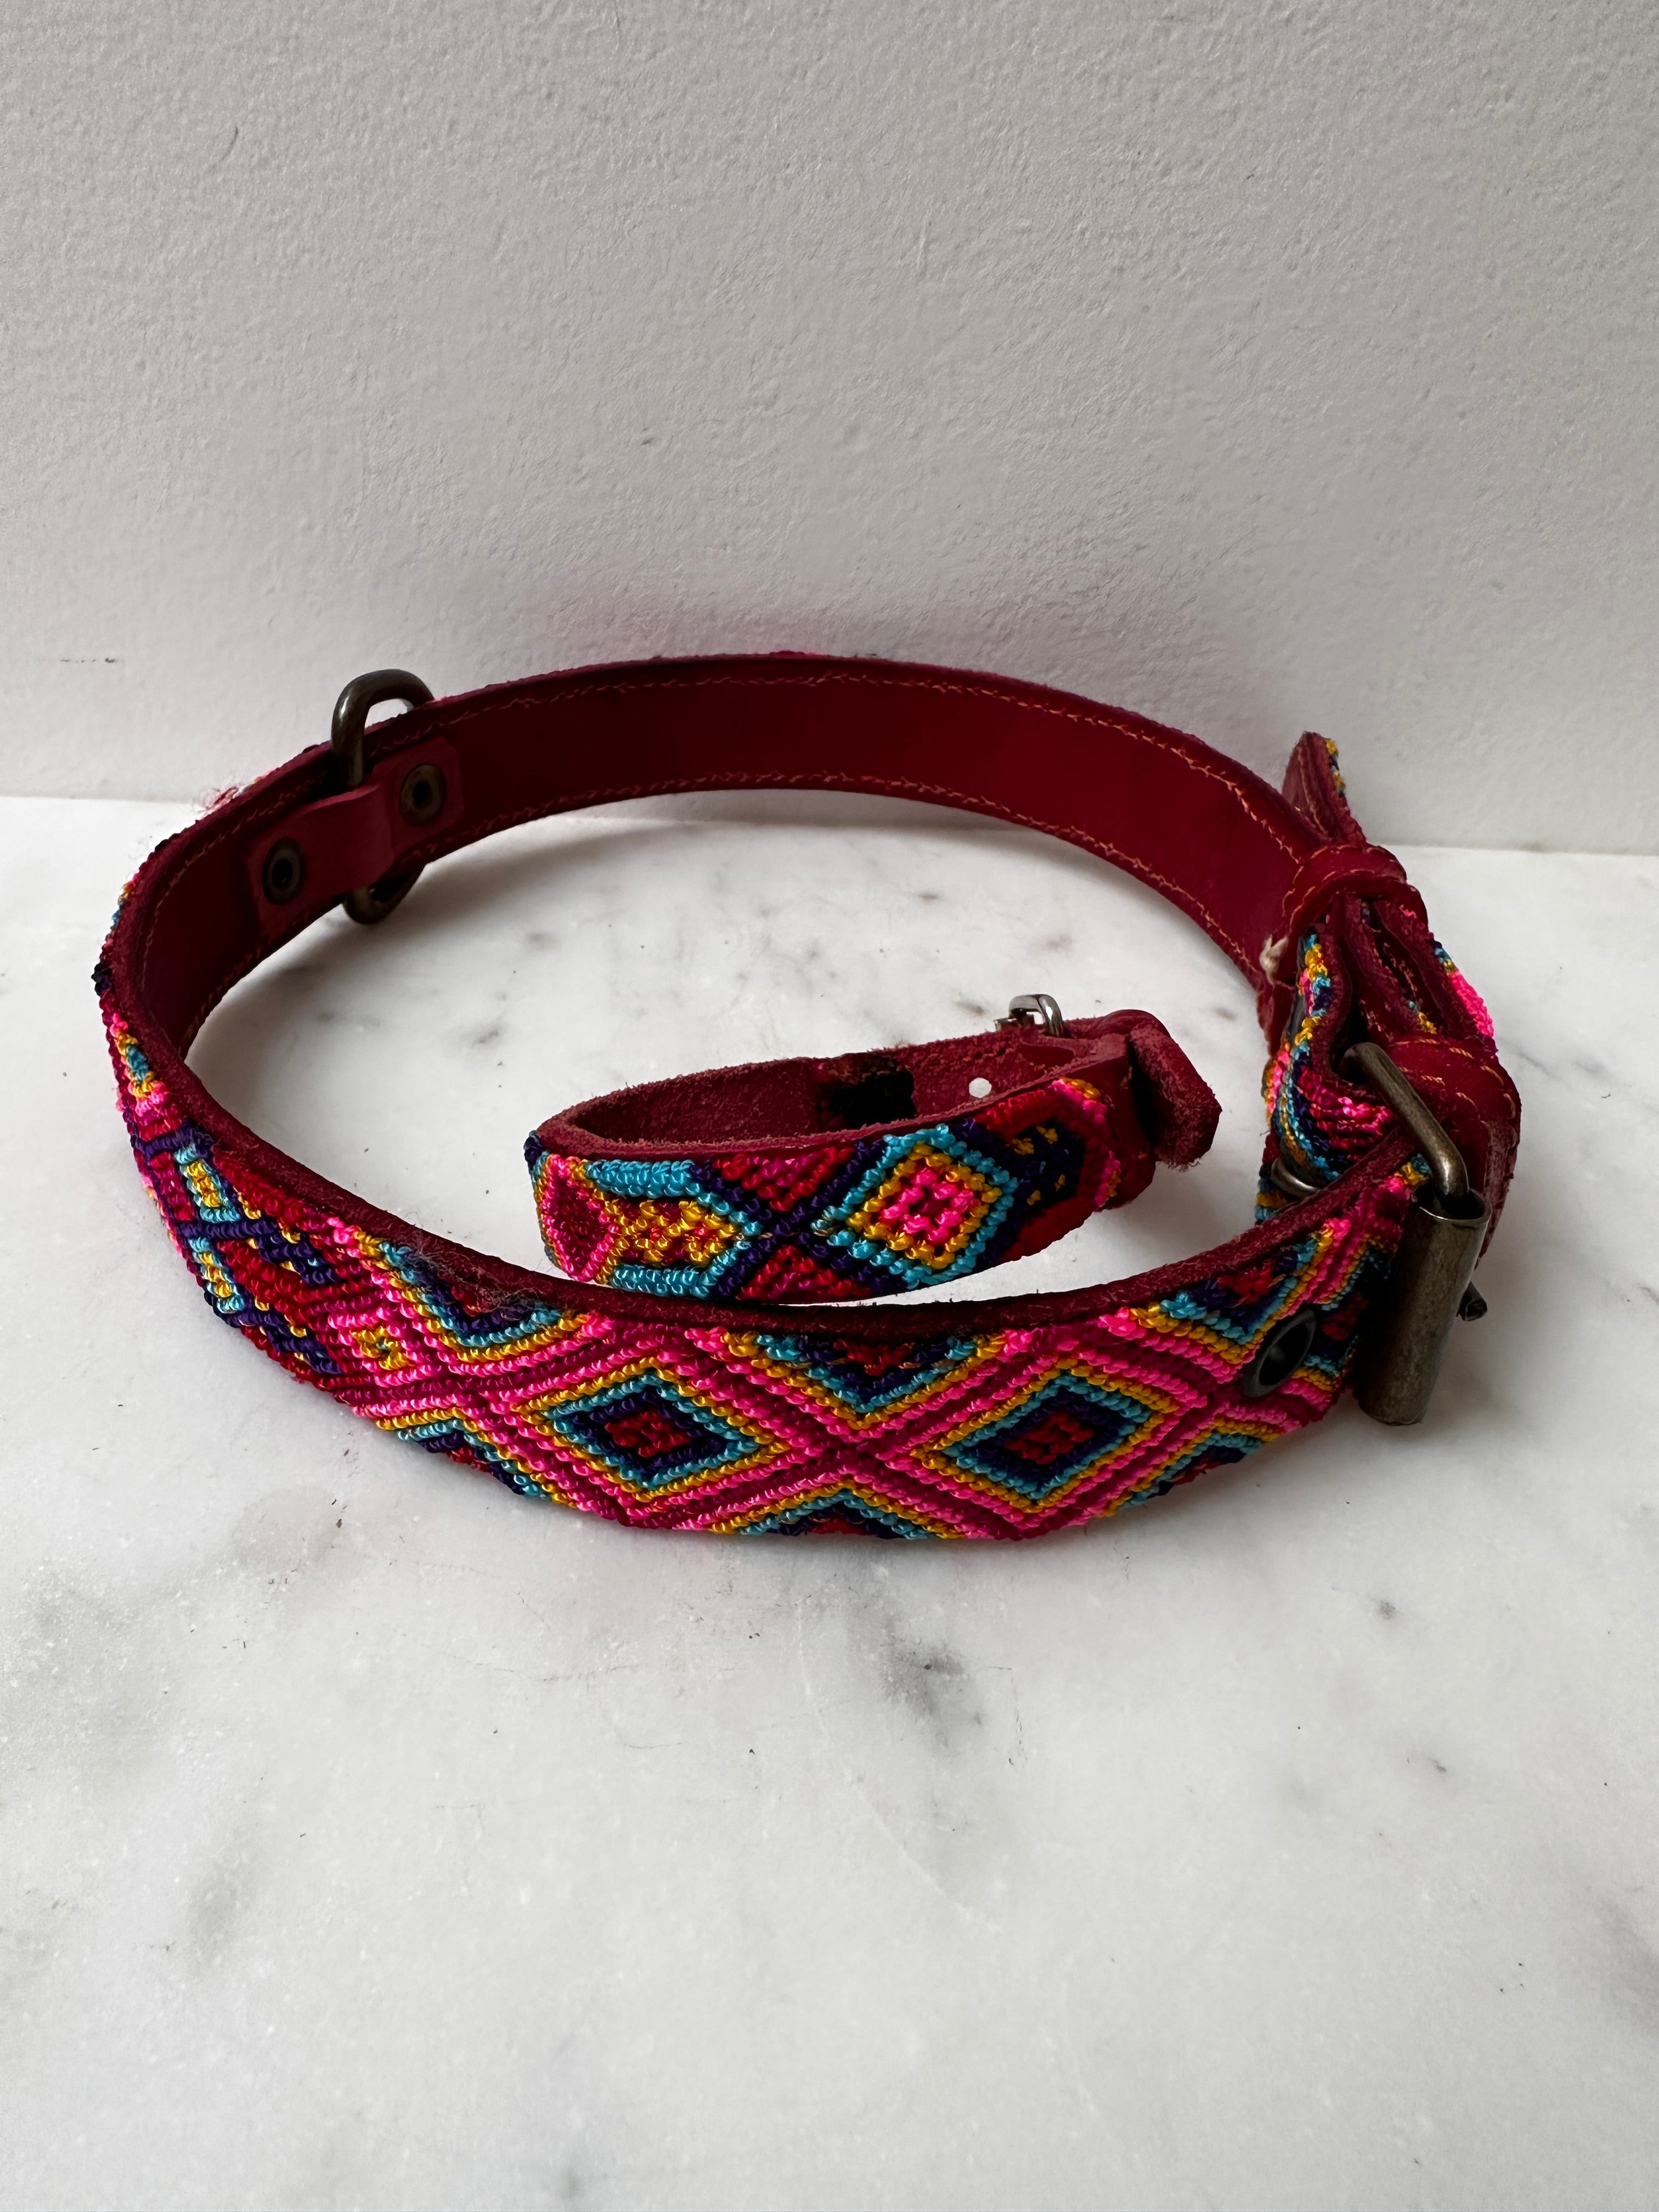 Future Nomads Homewares One Size Huichol Fully Embroidered Dog Collar L10